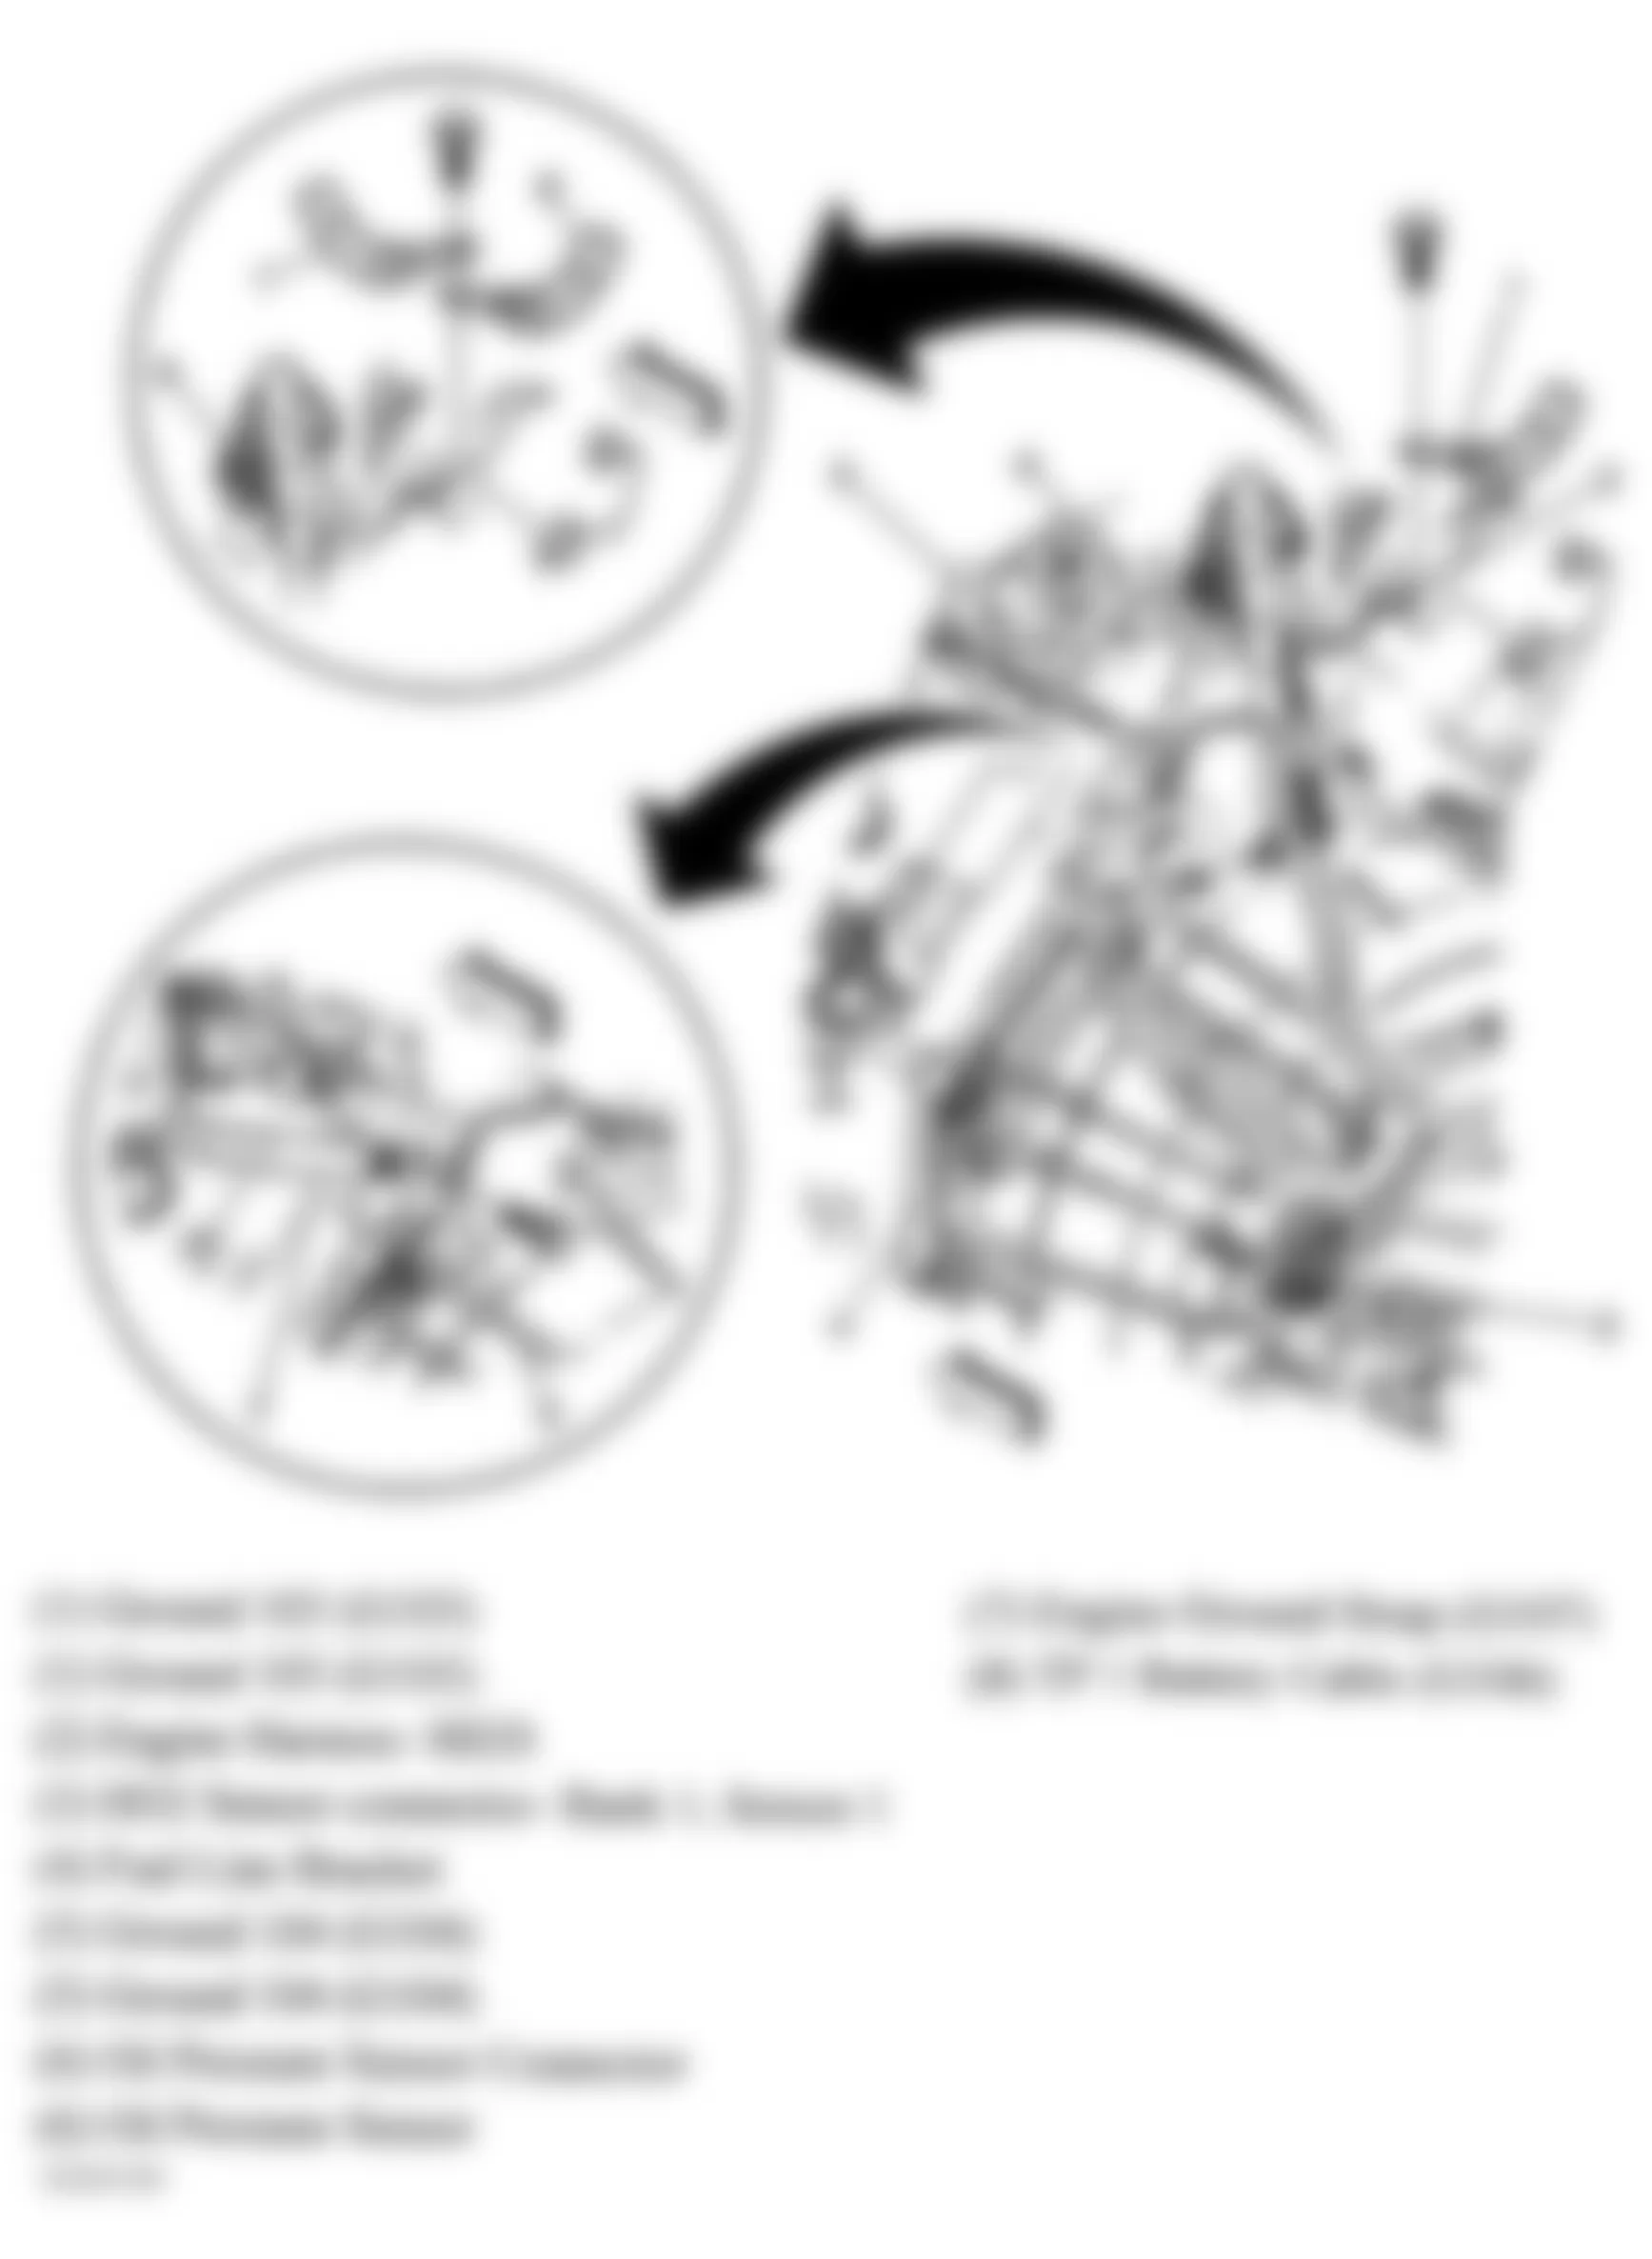 Chevrolet Avalanche 1500 2005 - Component Locations -  Rear Of Engine (4.8L, 5.3L & 6.0L)